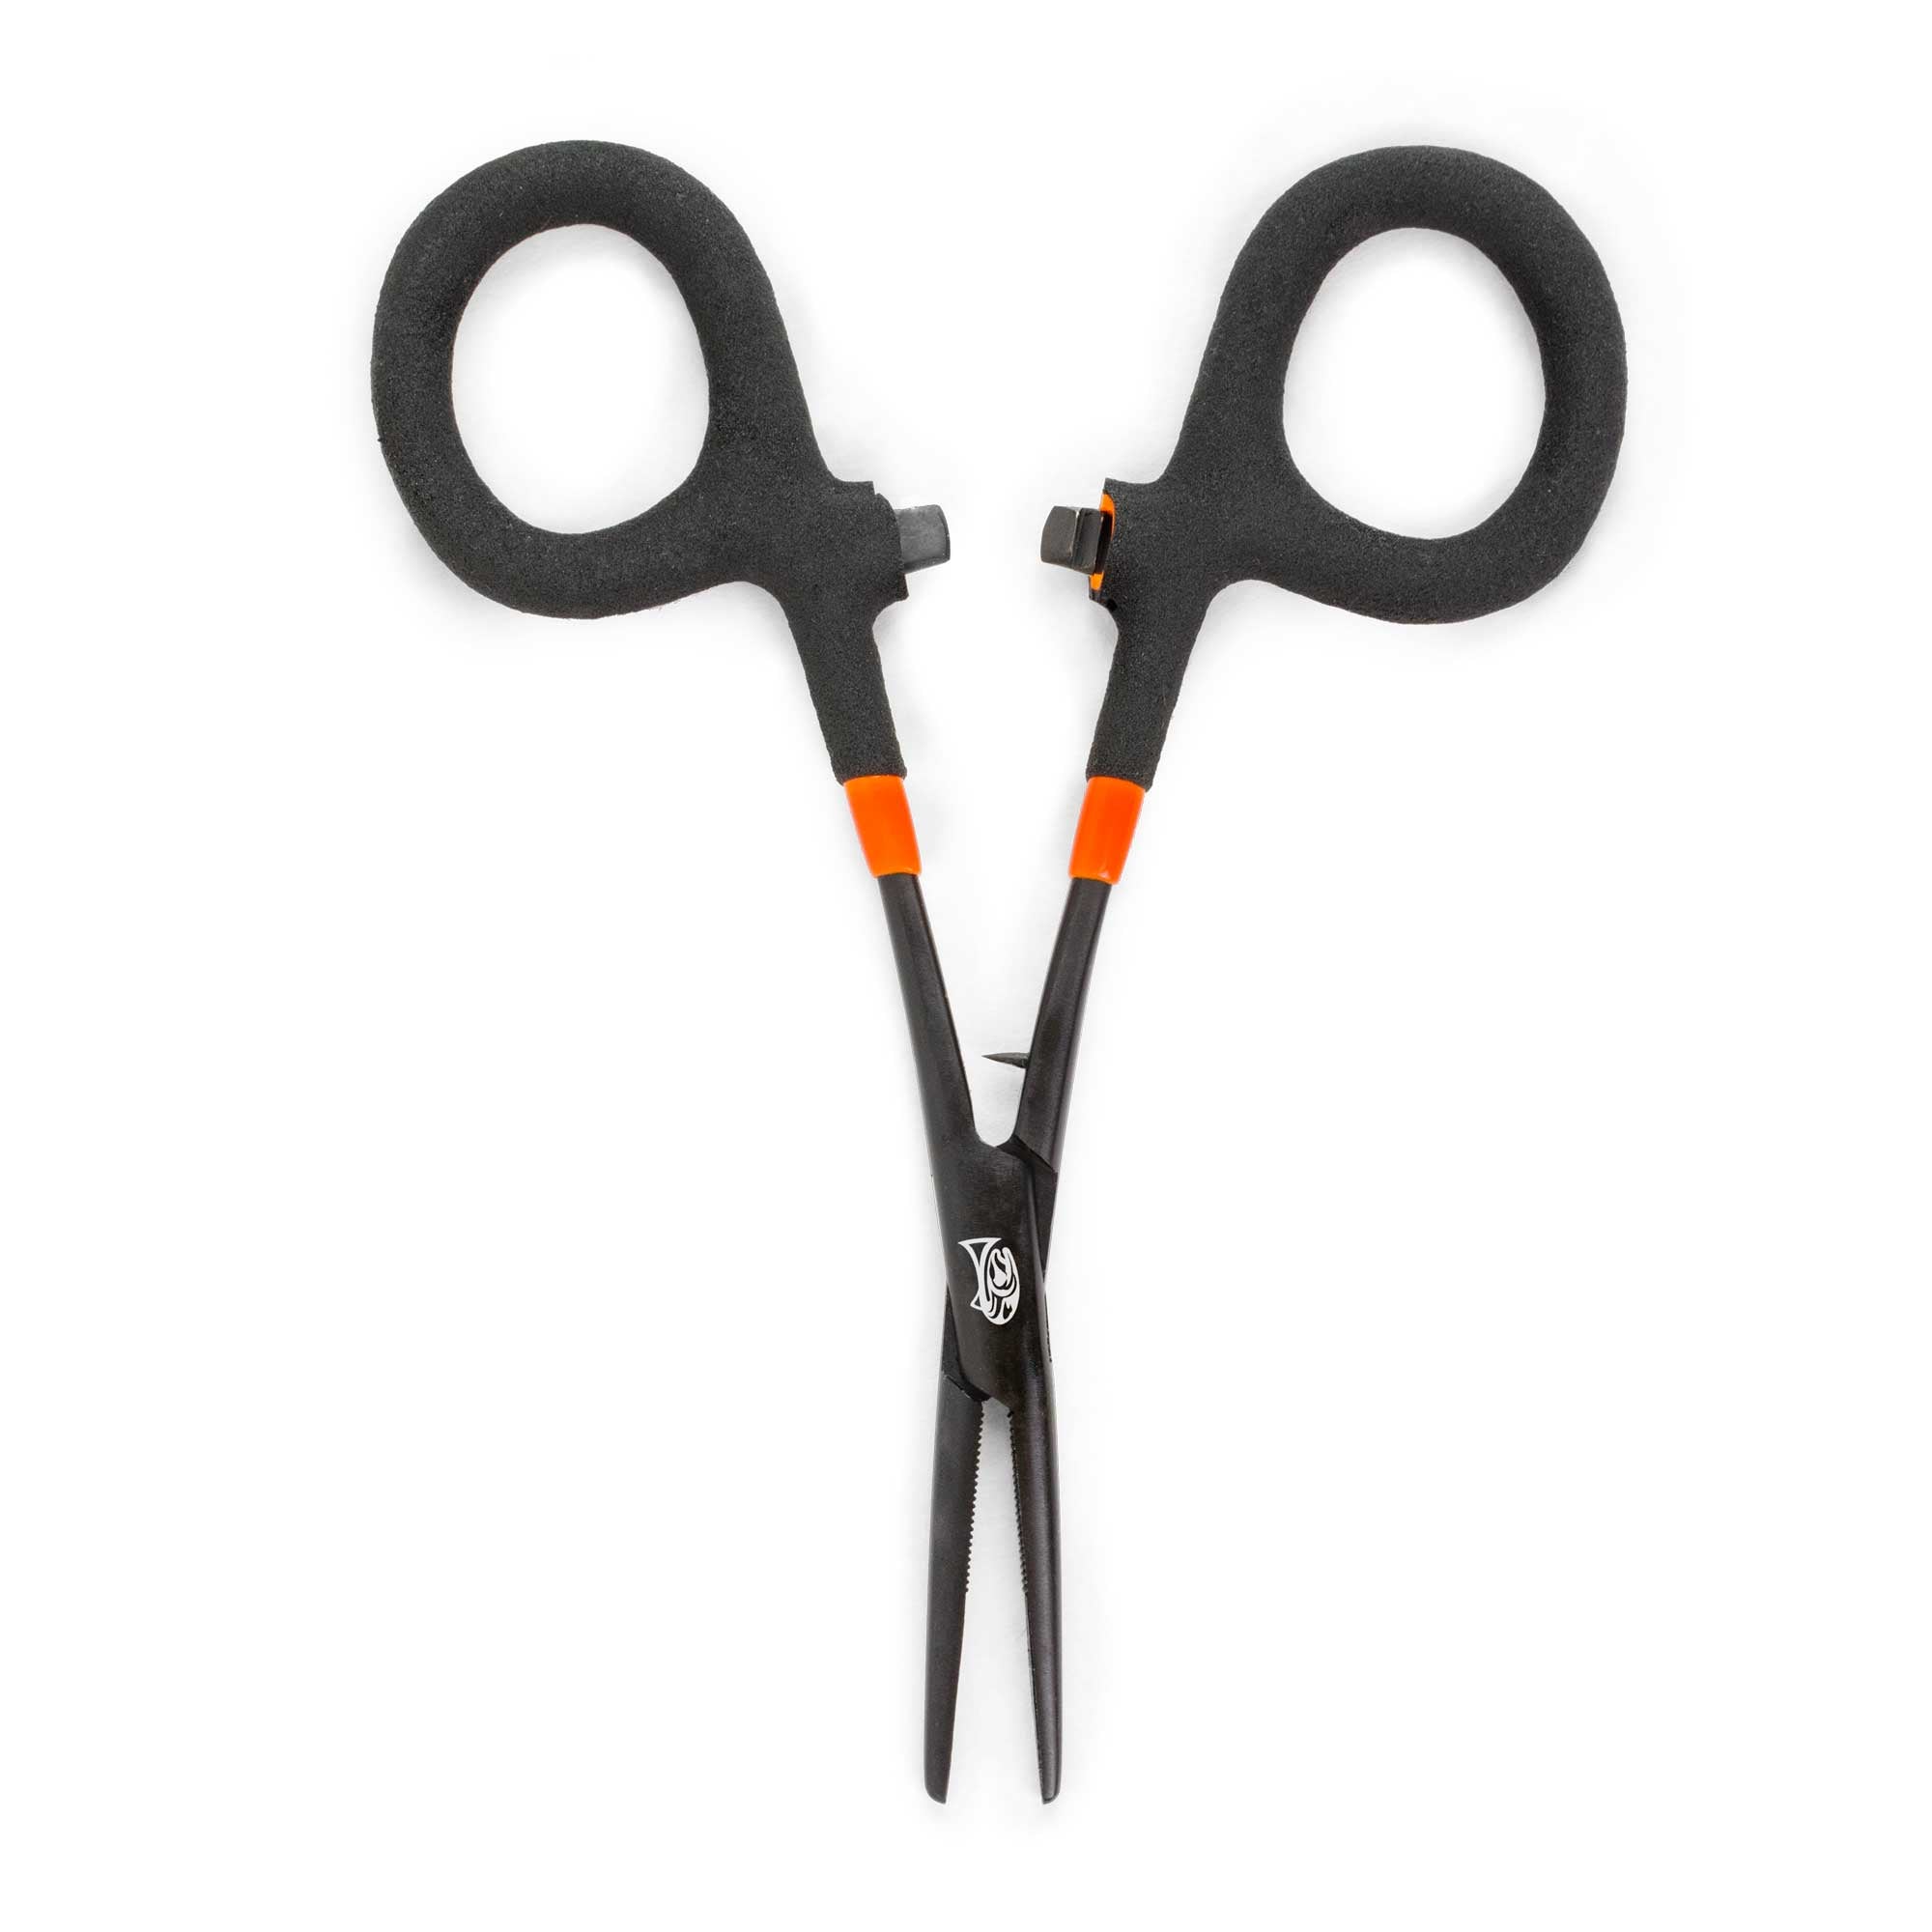 Loon Outdoors Rogue Hook Removal Forceps